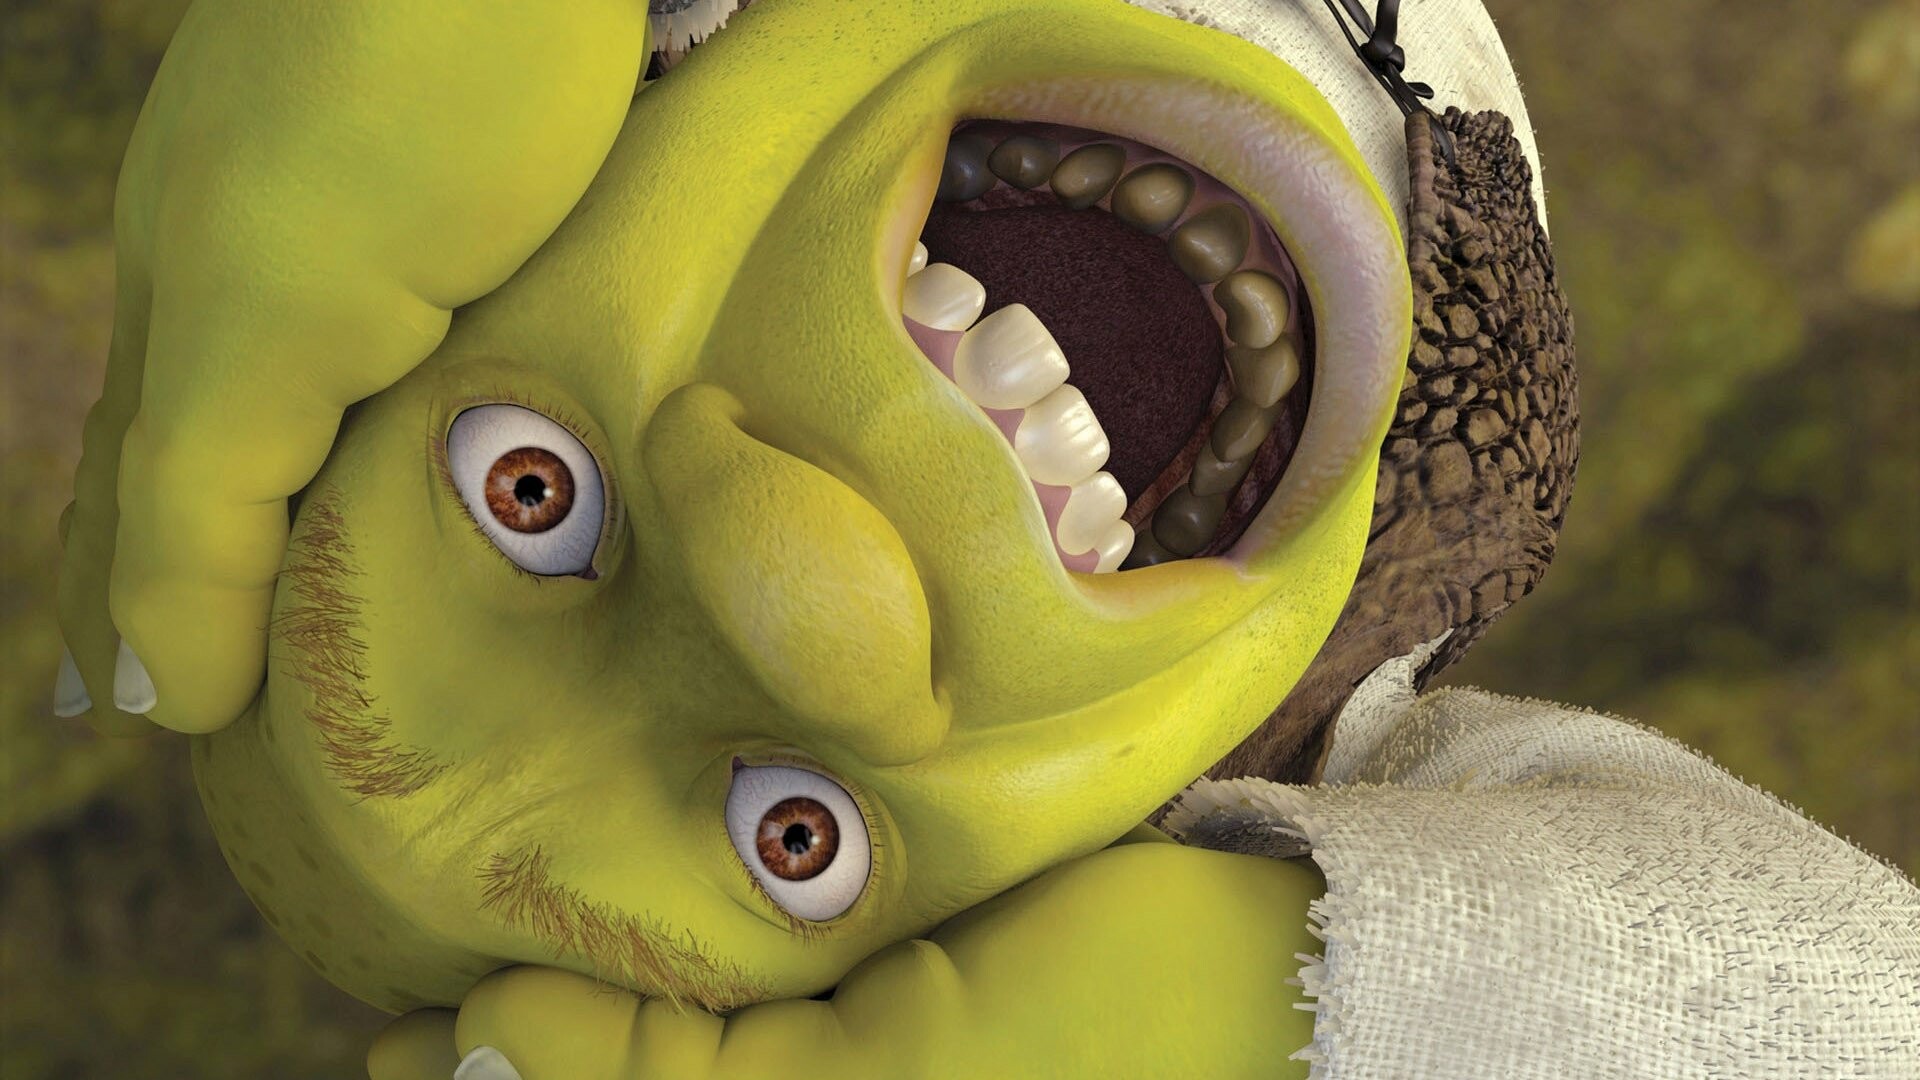 Shrek: Was made the mascot for the company's animation productions, DreamWorks Animation. 1920x1080 Full HD Background.